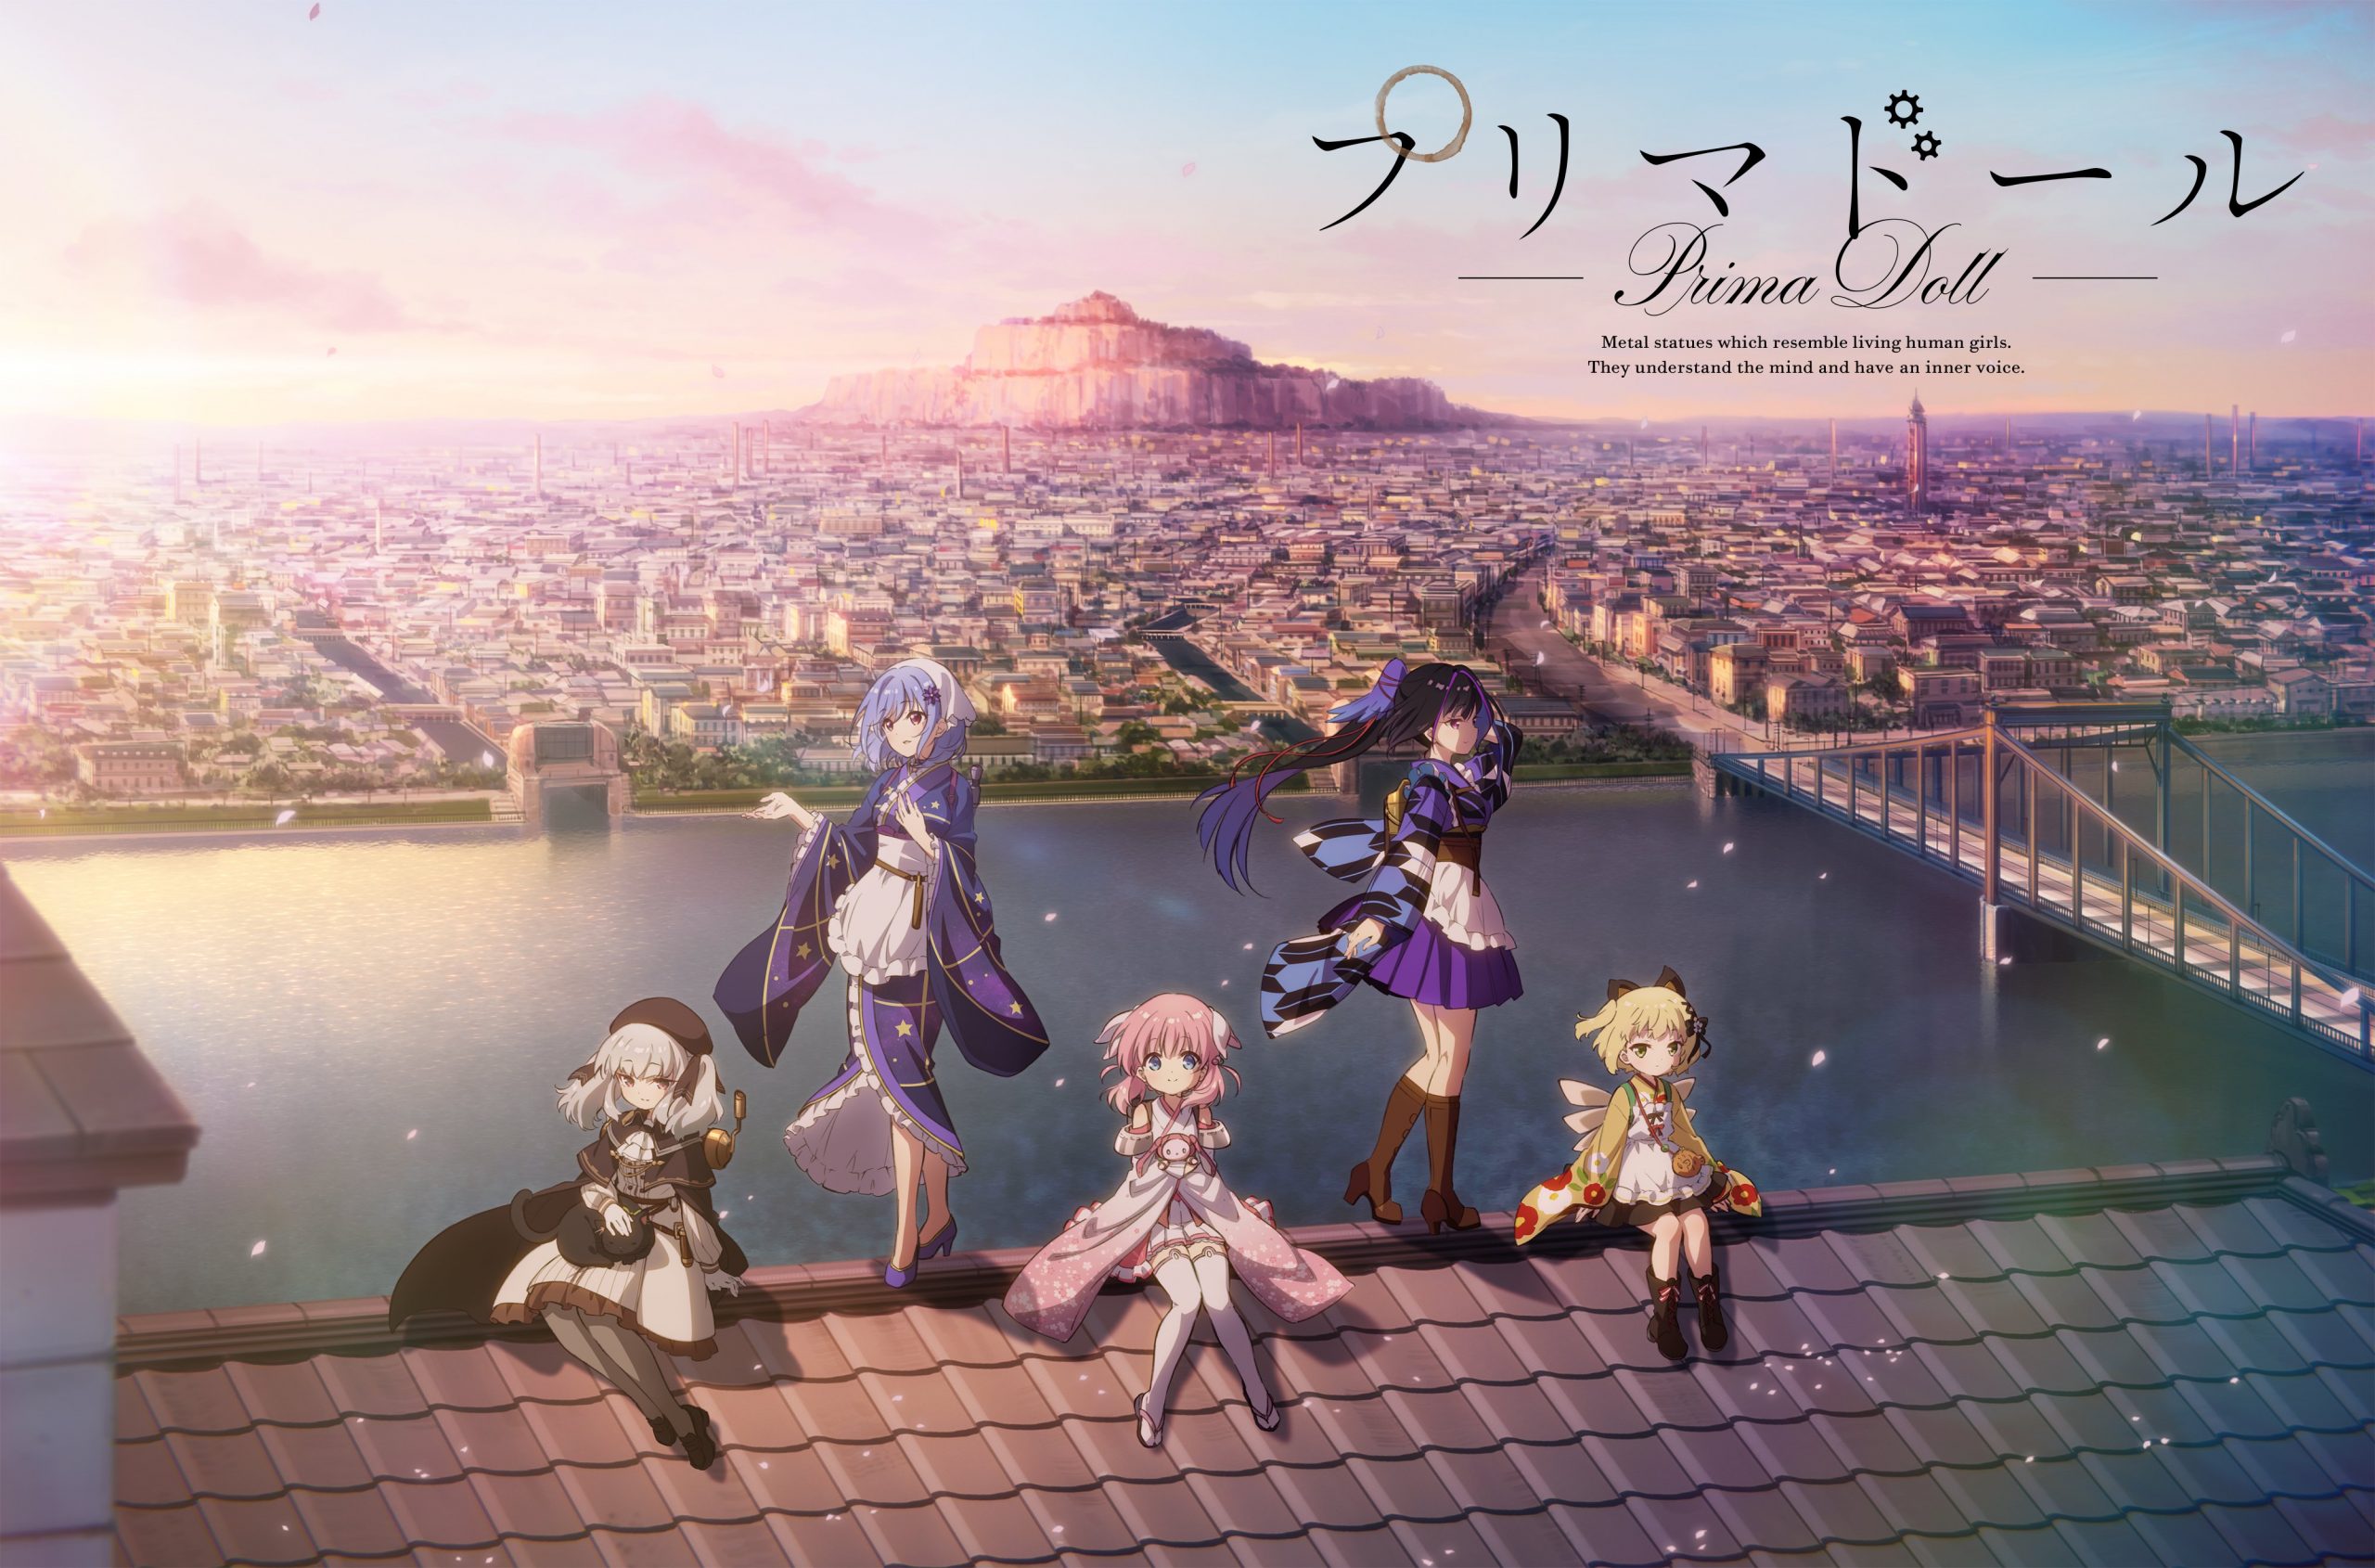 prima-doll-kv-scaled Mixed Media Project "Prima Doll" Getting An Anime Adaptation in 2022!